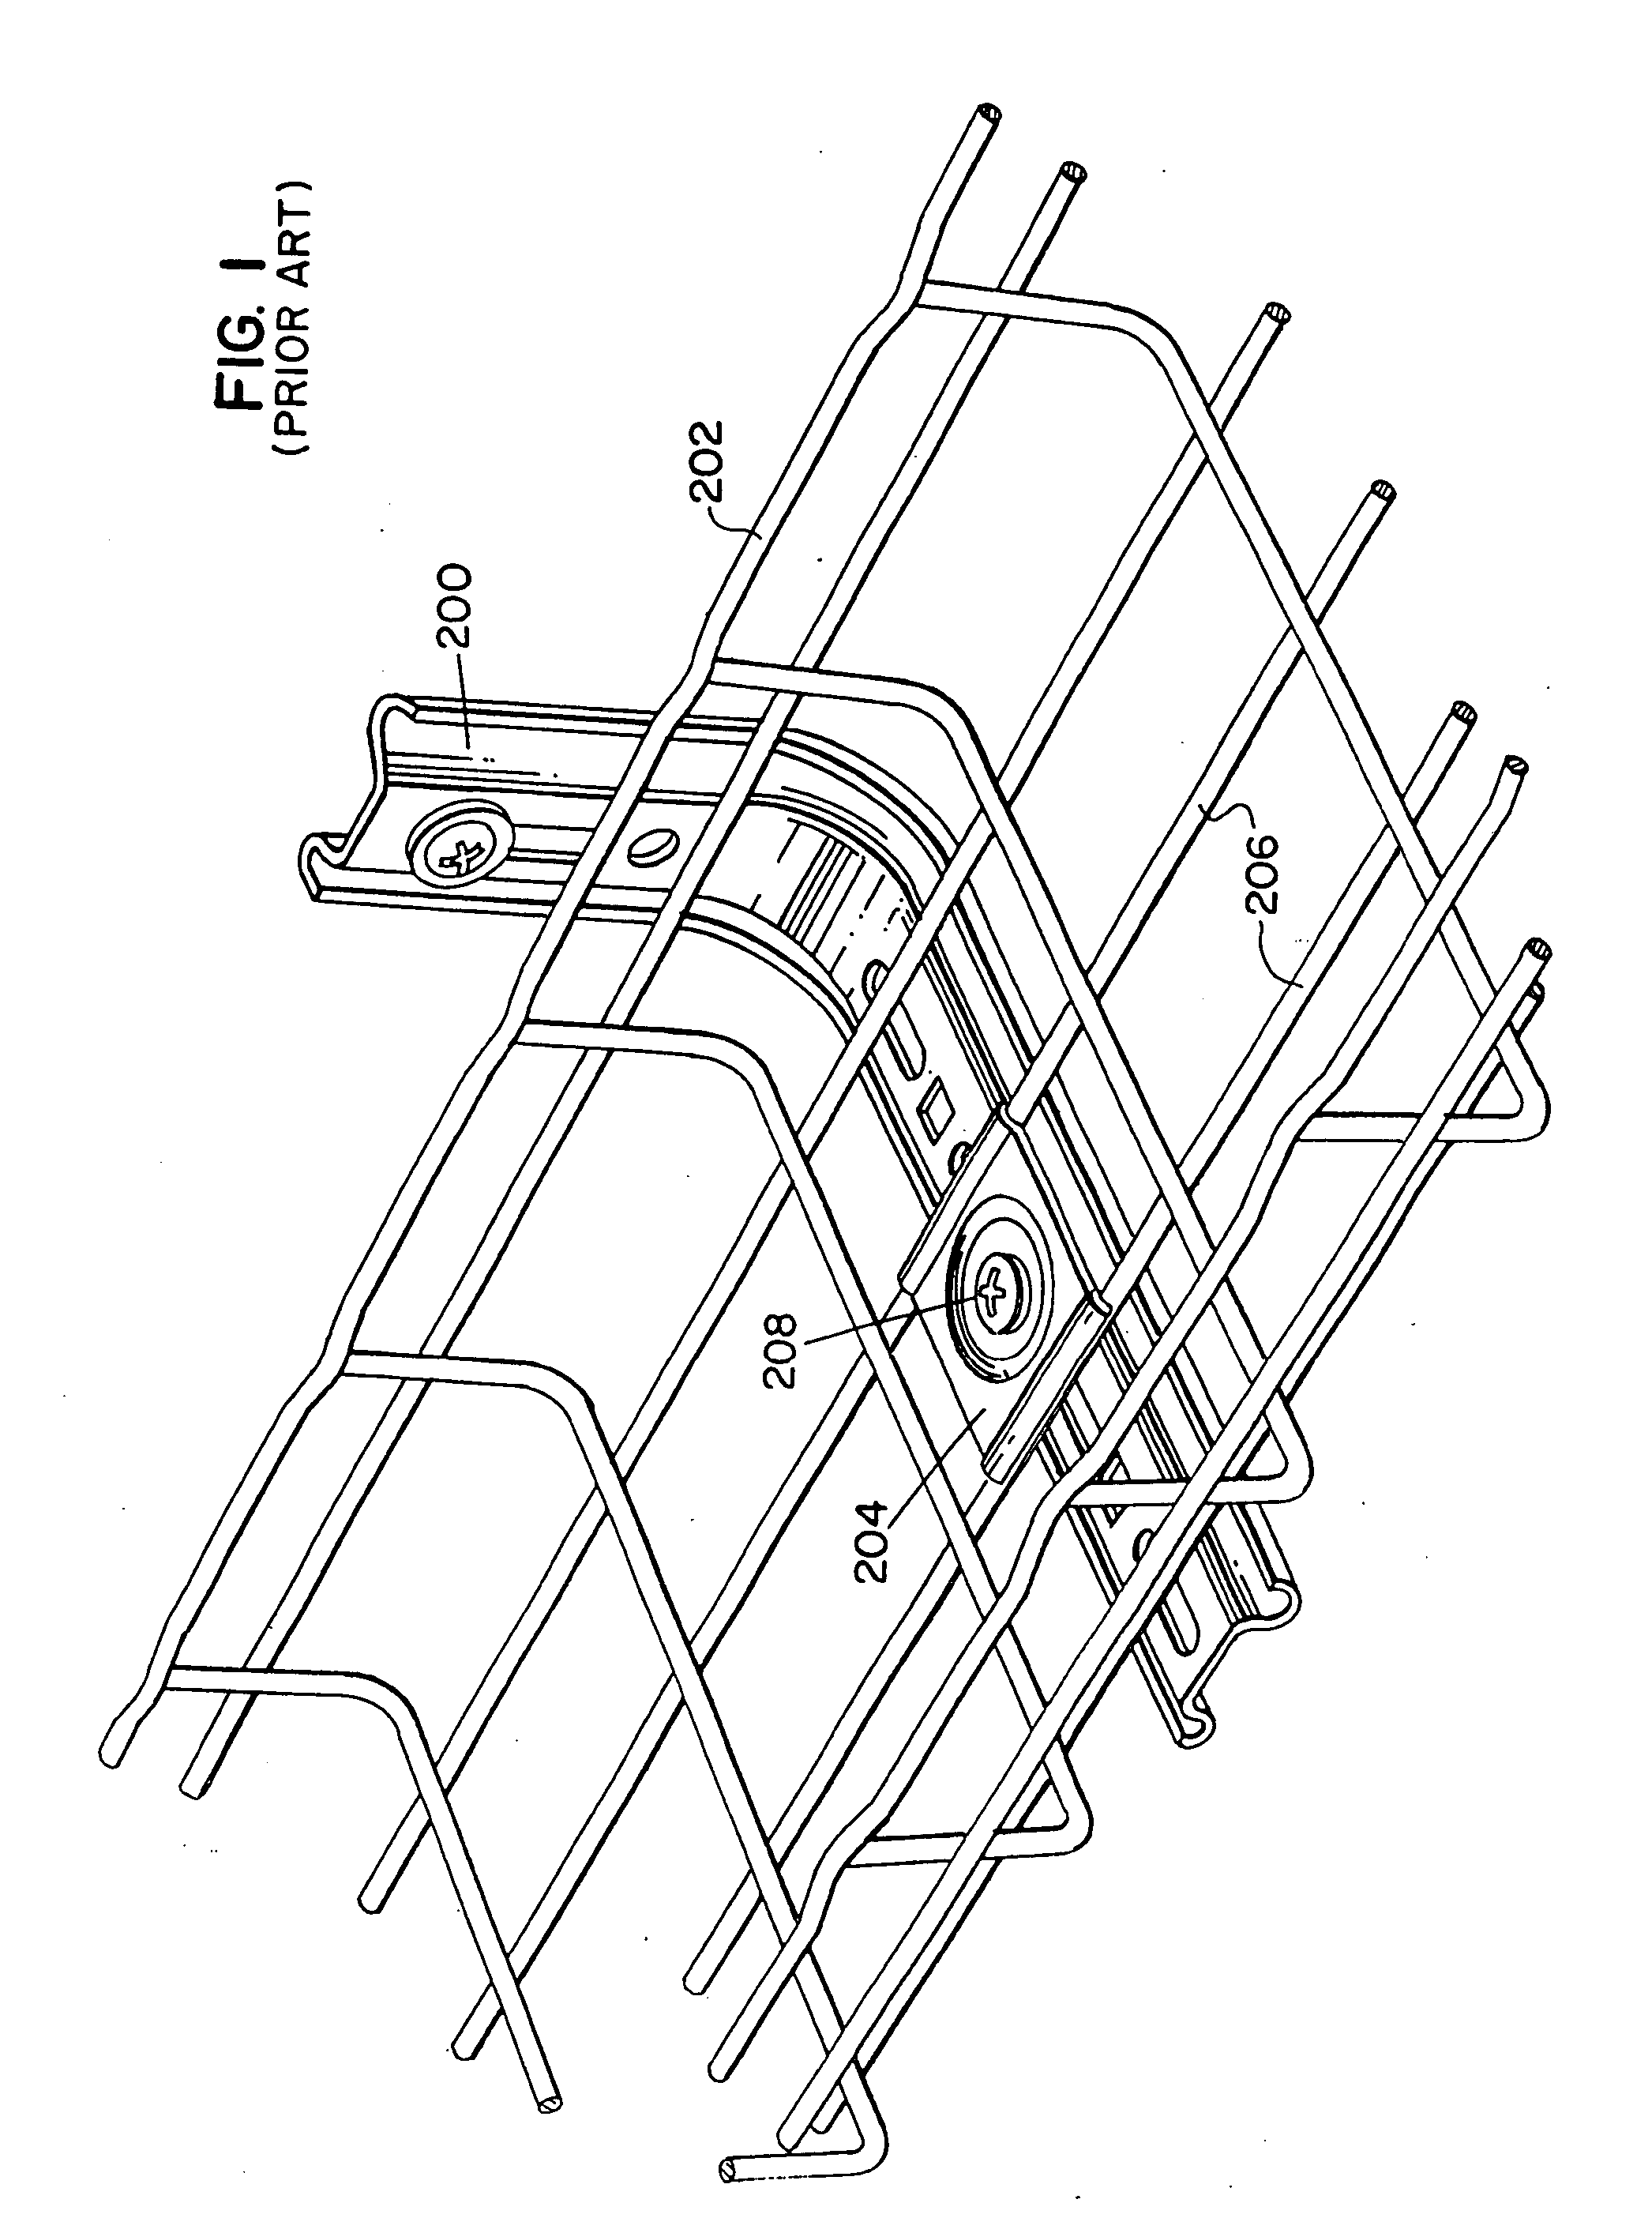 Cable tray system